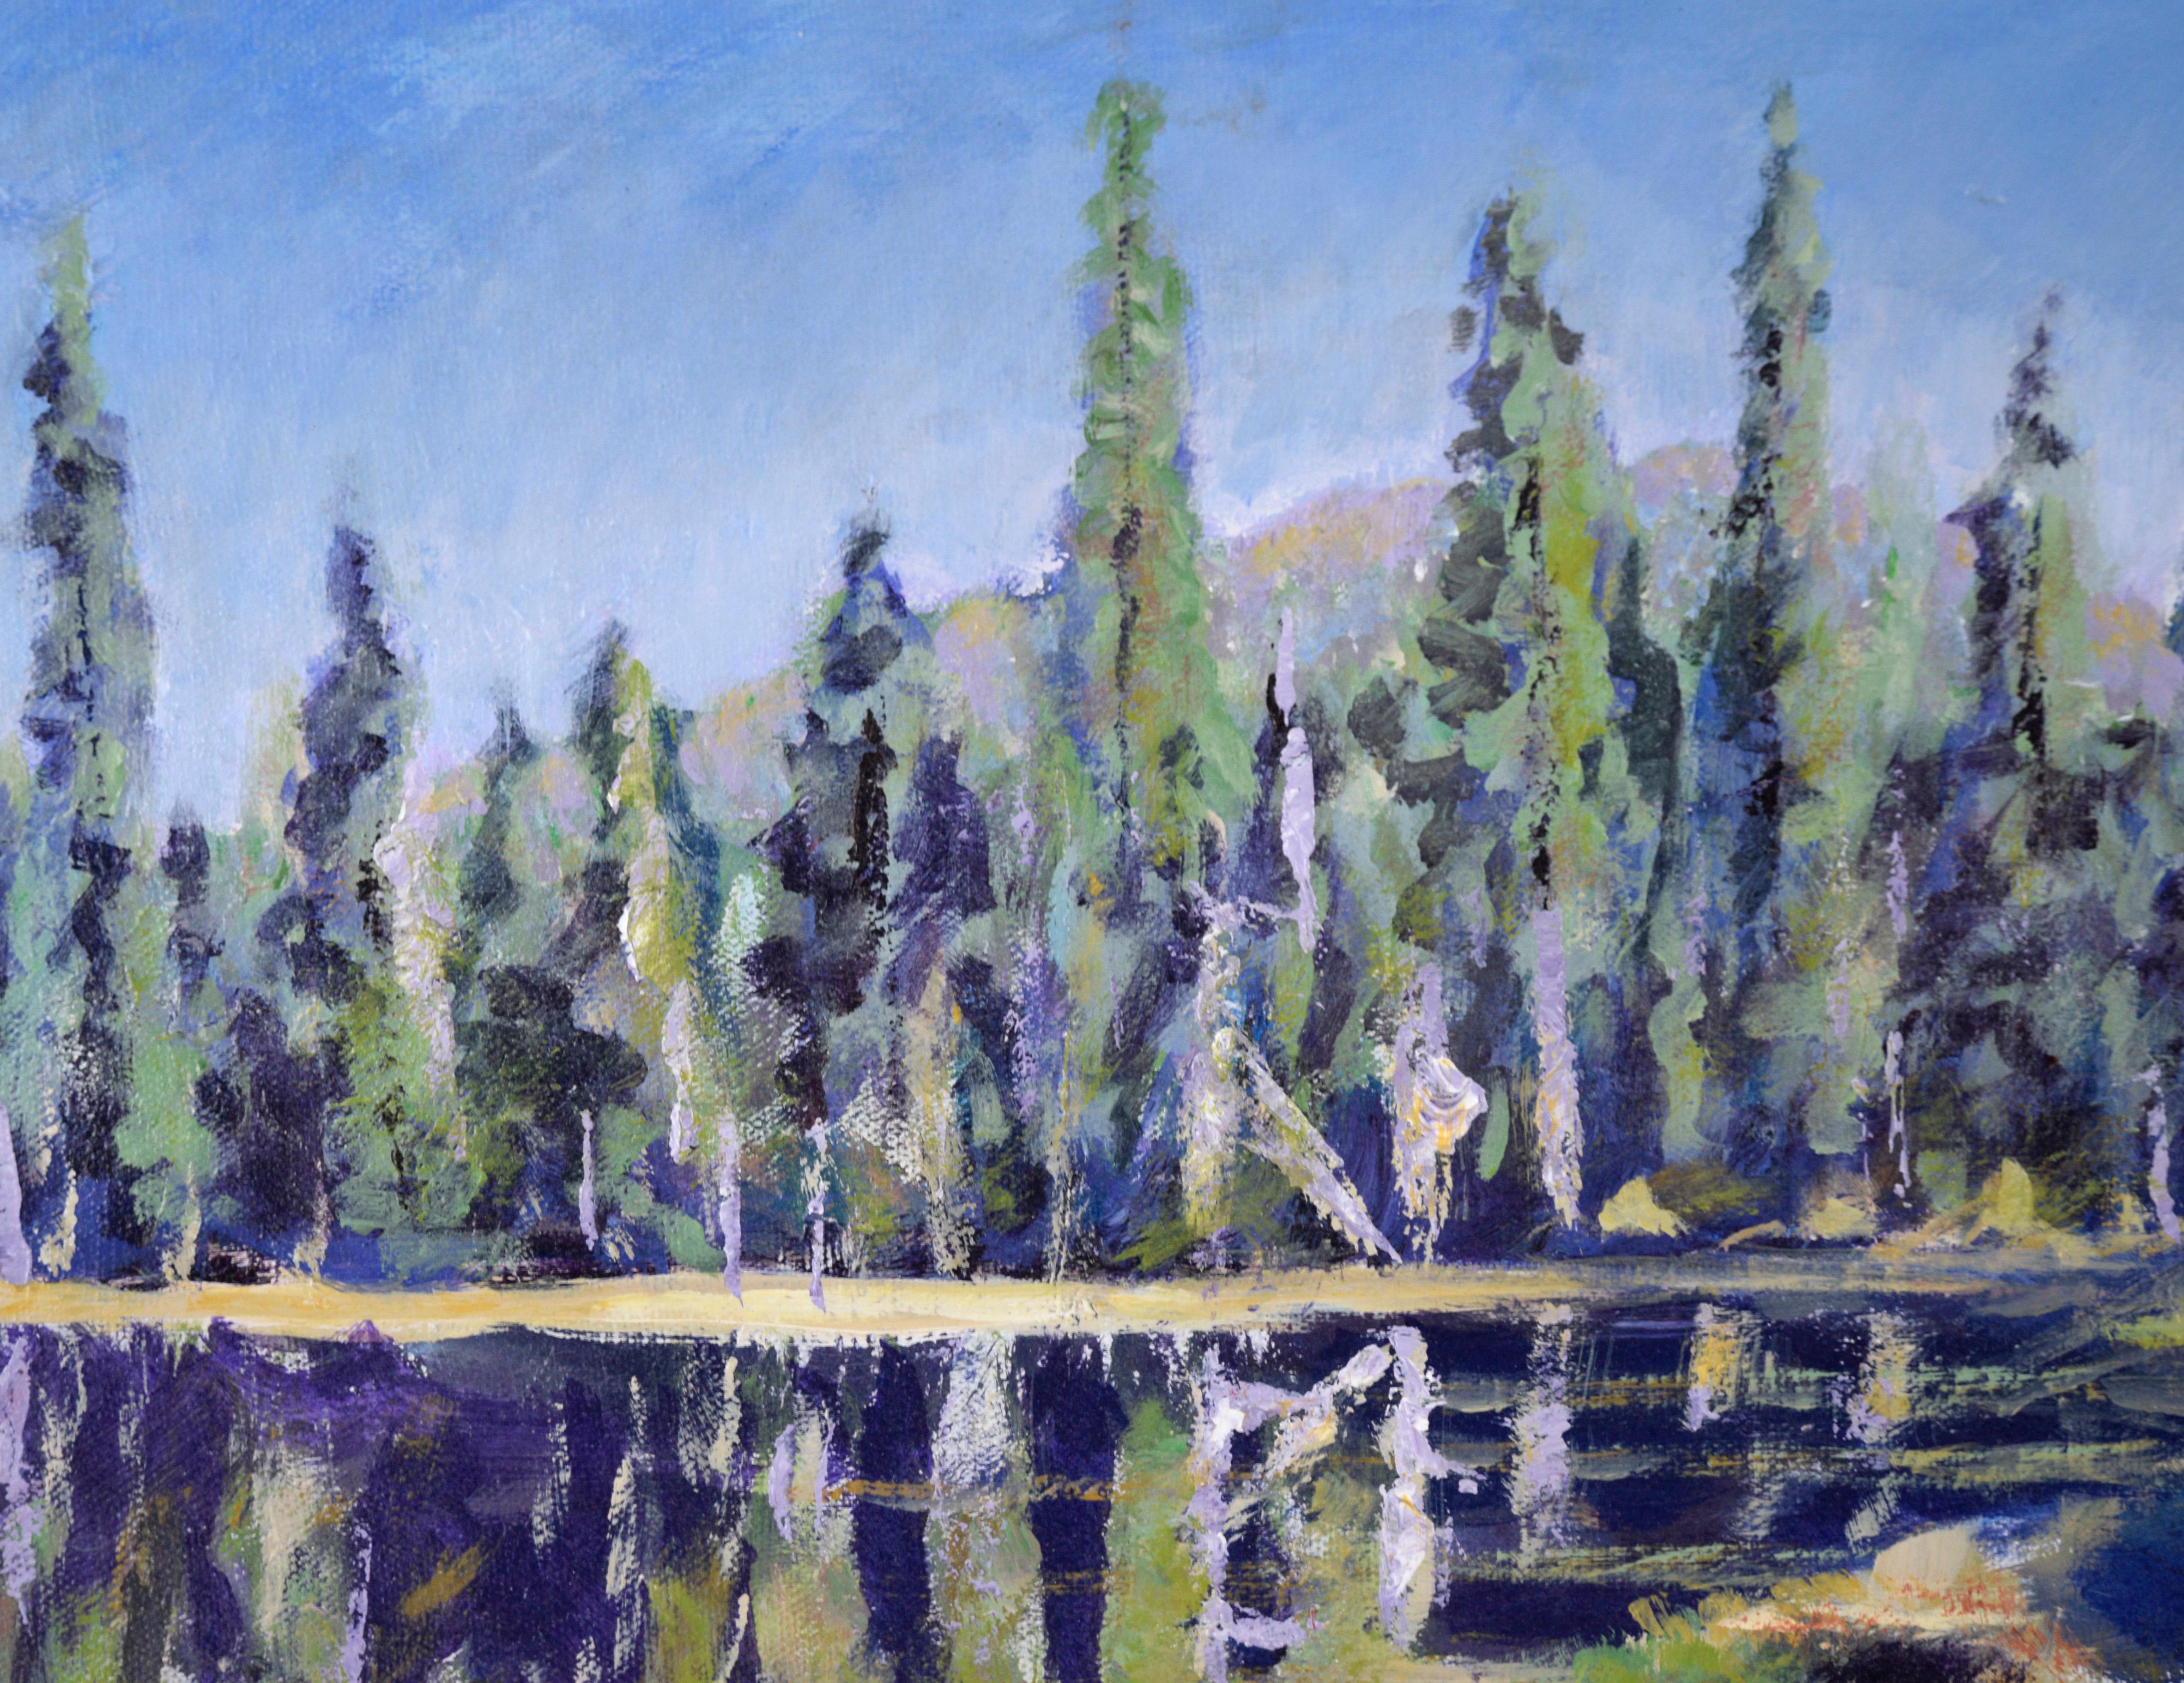 Mt. Lassen Lake - Plein Aire Landscape in Acrylic on Canvas - Painting by Nick White